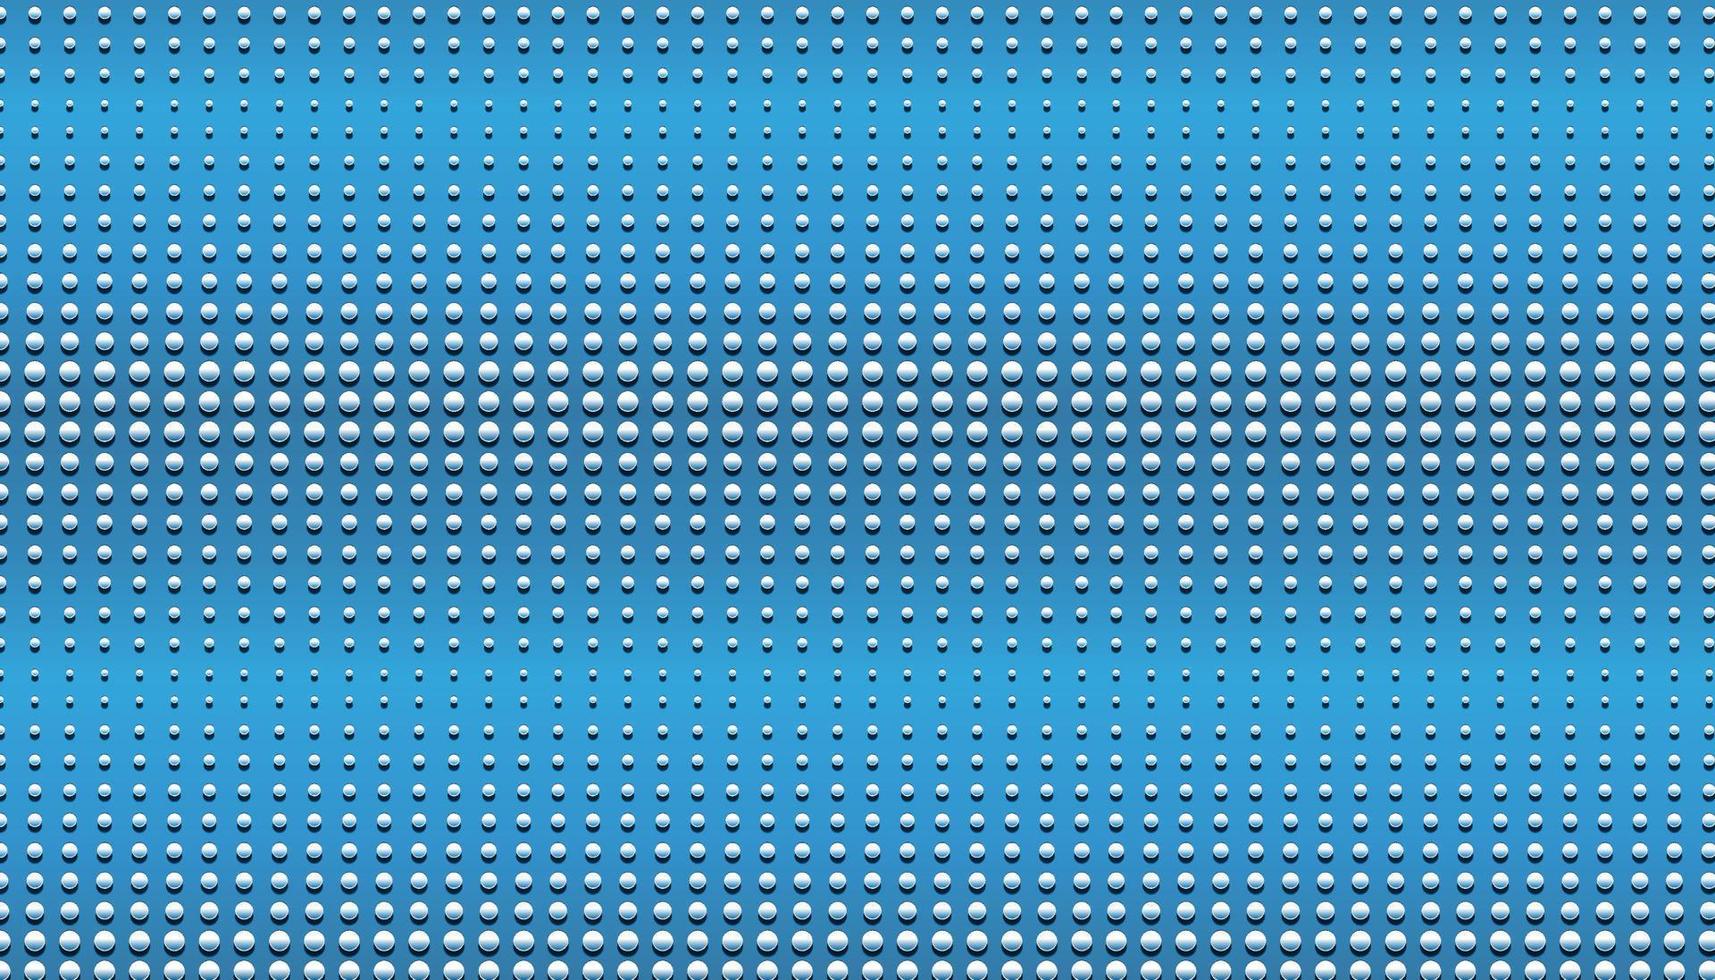 Bump dots on blue background vector